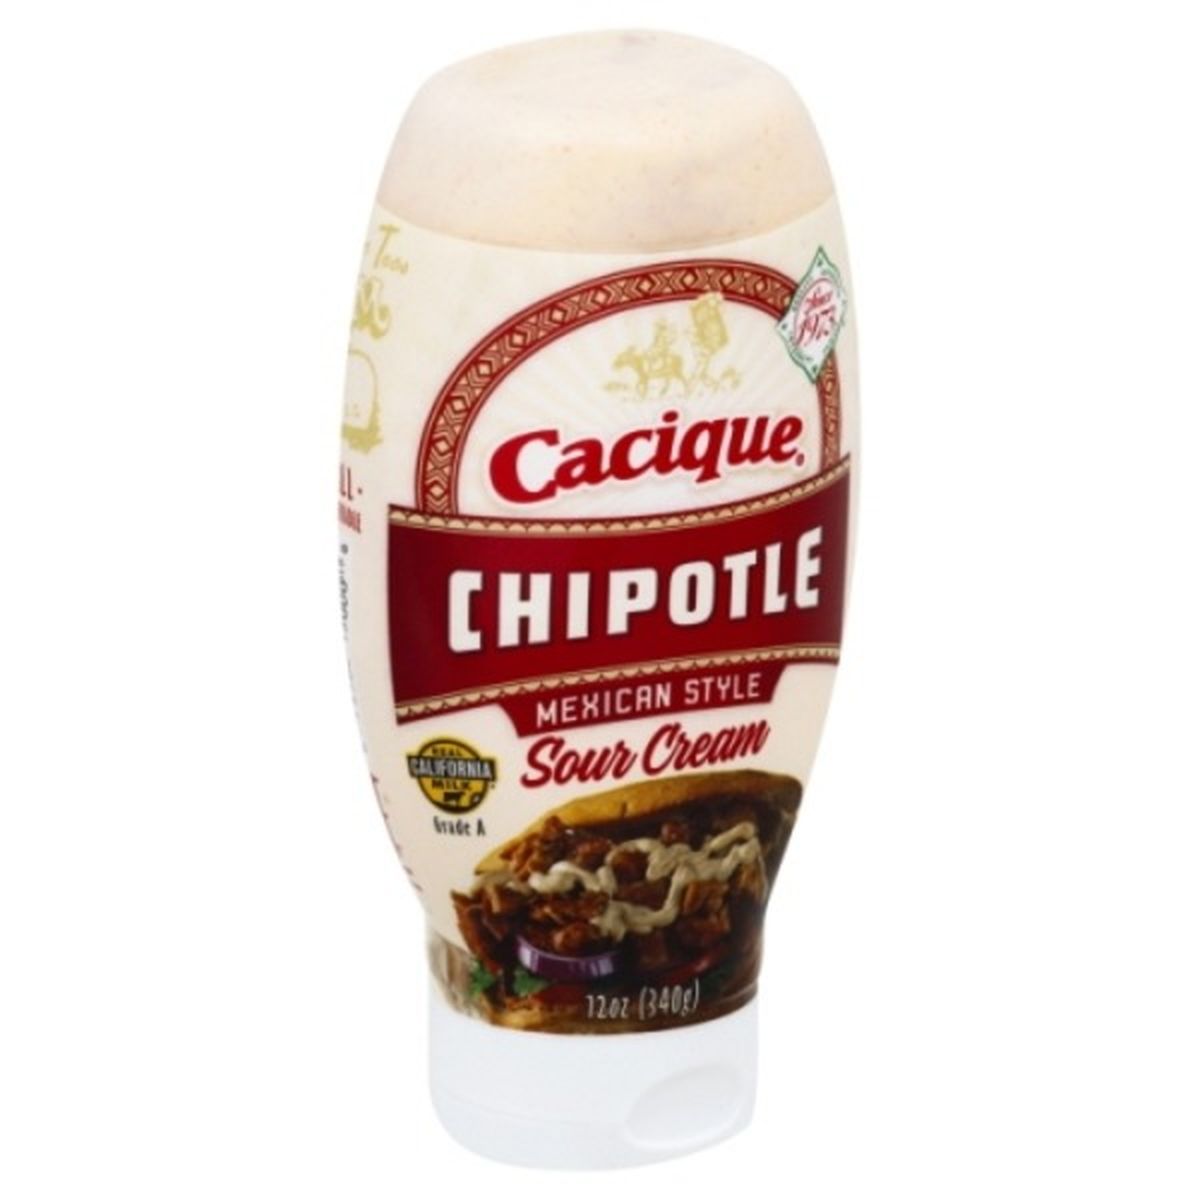 Calories in Cacique Sour Cream, Chipotle, Mexican Style